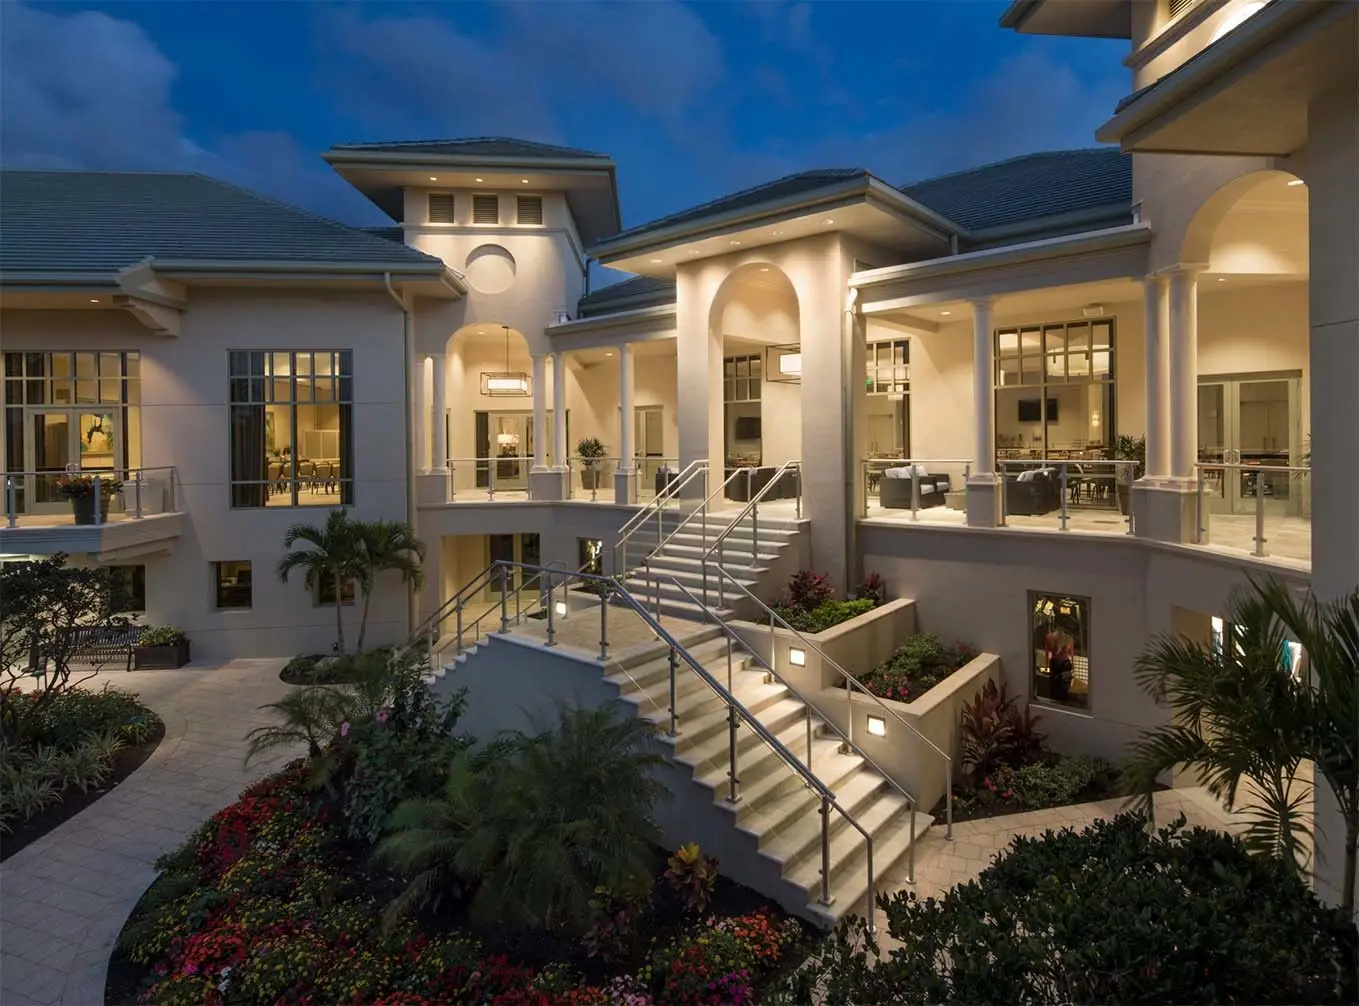 Boca West Homes for Sale | Boca West Country Club Homes for Sale